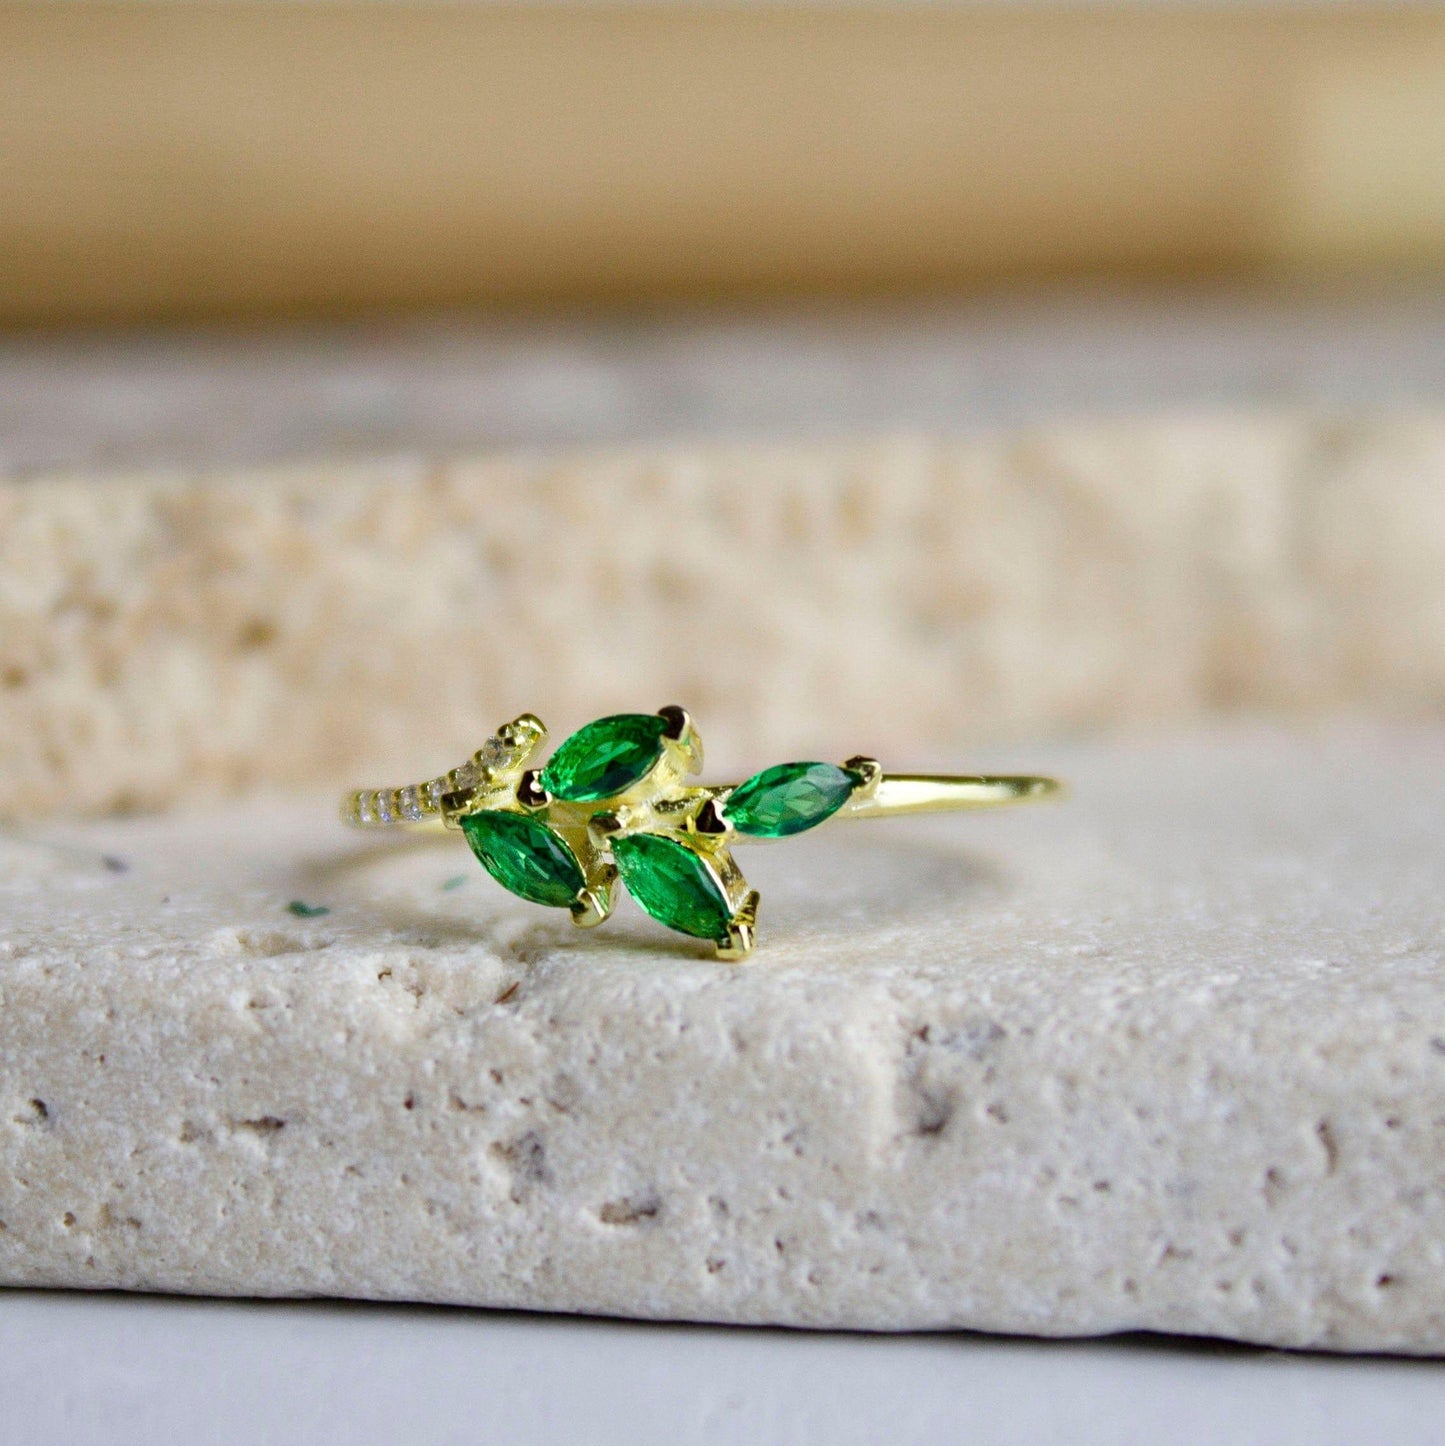 Unique gemstone Flower Green Marquise Solid Gold Wedding Band Anniversary Ring - JBR Jeweler